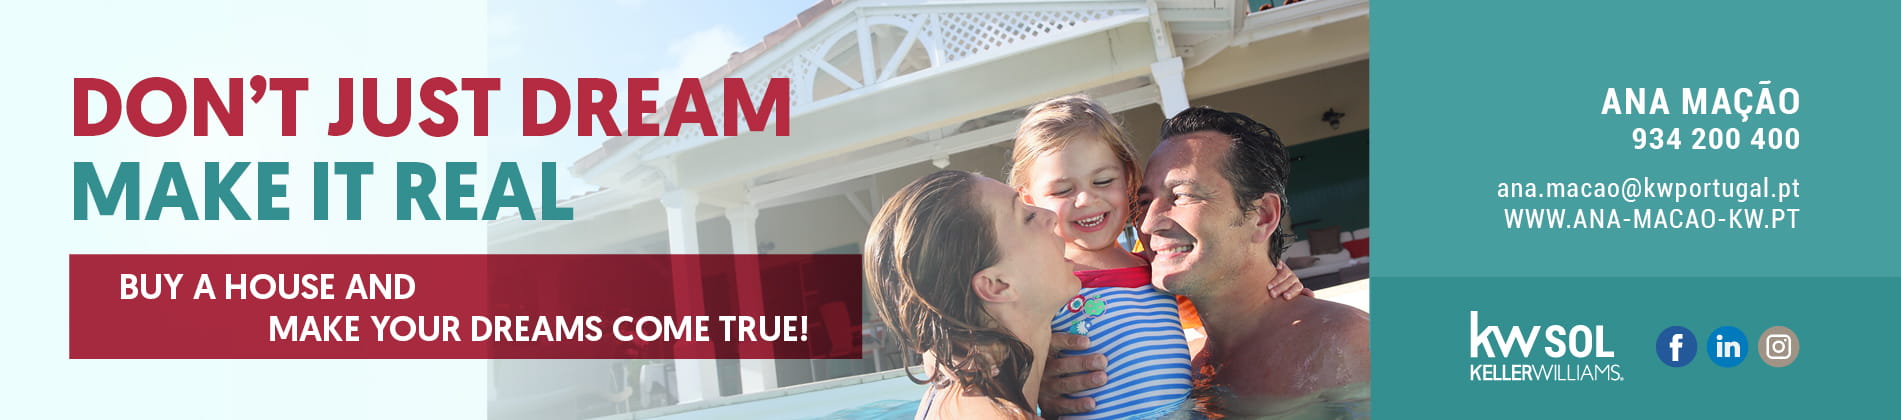 Don't just dream, buy a new home and make your dreams come true!